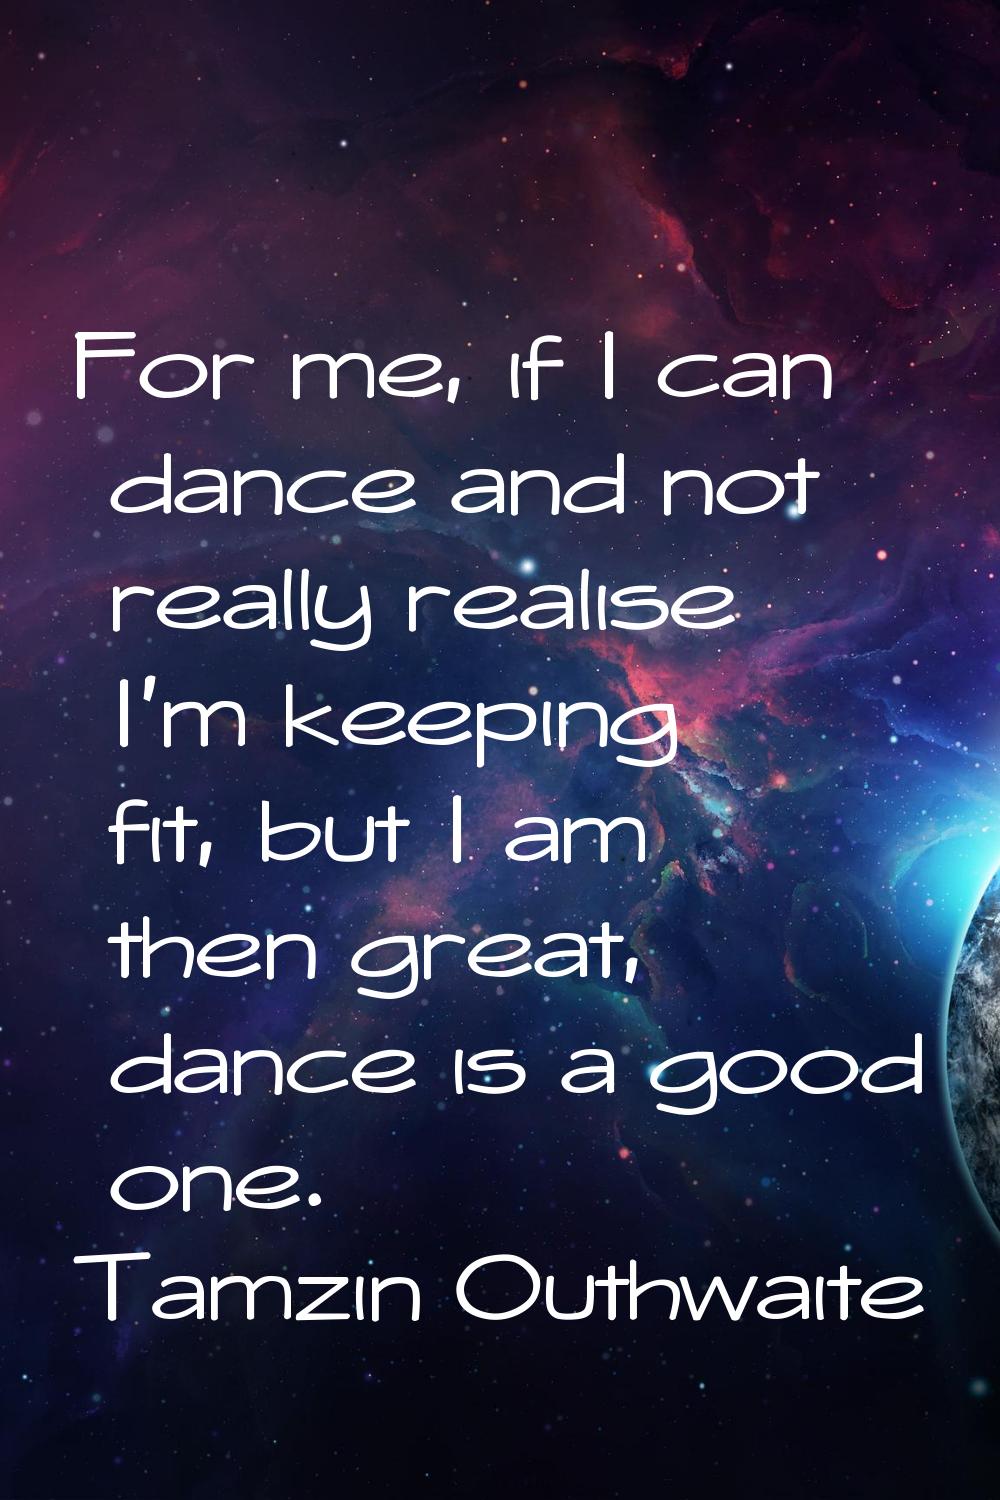 For me, if I can dance and not really realise I'm keeping fit, but I am then great, dance is a good